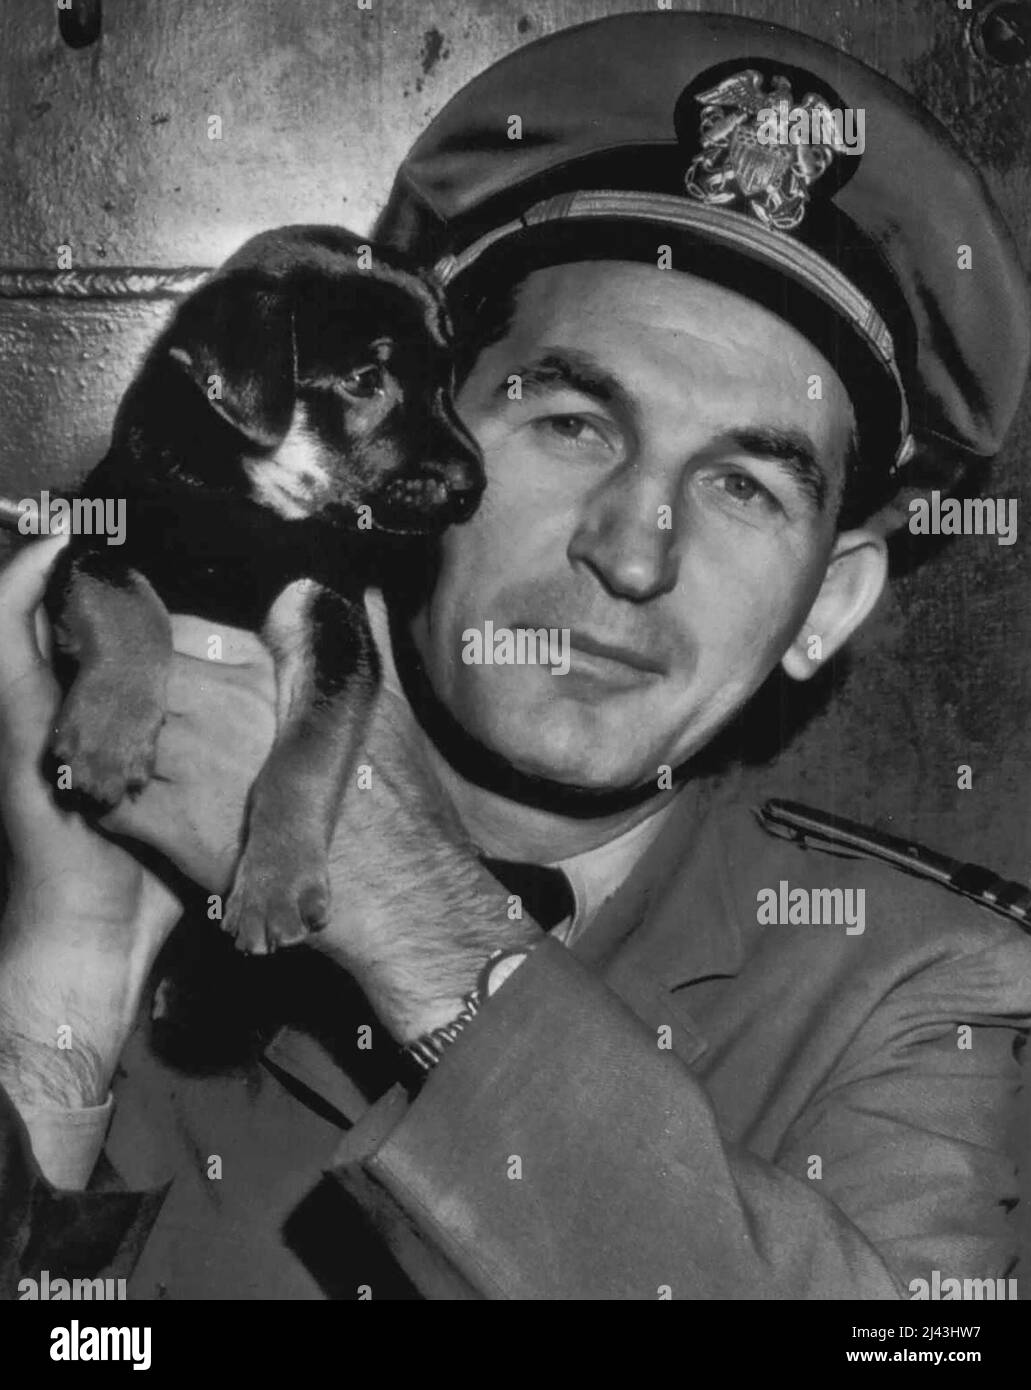 Pup Born On Bikini Reaches U.S. -- Geiger Sweet, one of seven pups born on Bikini Island, and two days old when second Atomic Bomb test was staged, arrives here today on shoulder of his master, Lt. Cmdr. S.A. Jeranko of Washington, D.C., who found him on the Island. August 26, 1946. (Photo by AP Wirephoto). Stock Photo